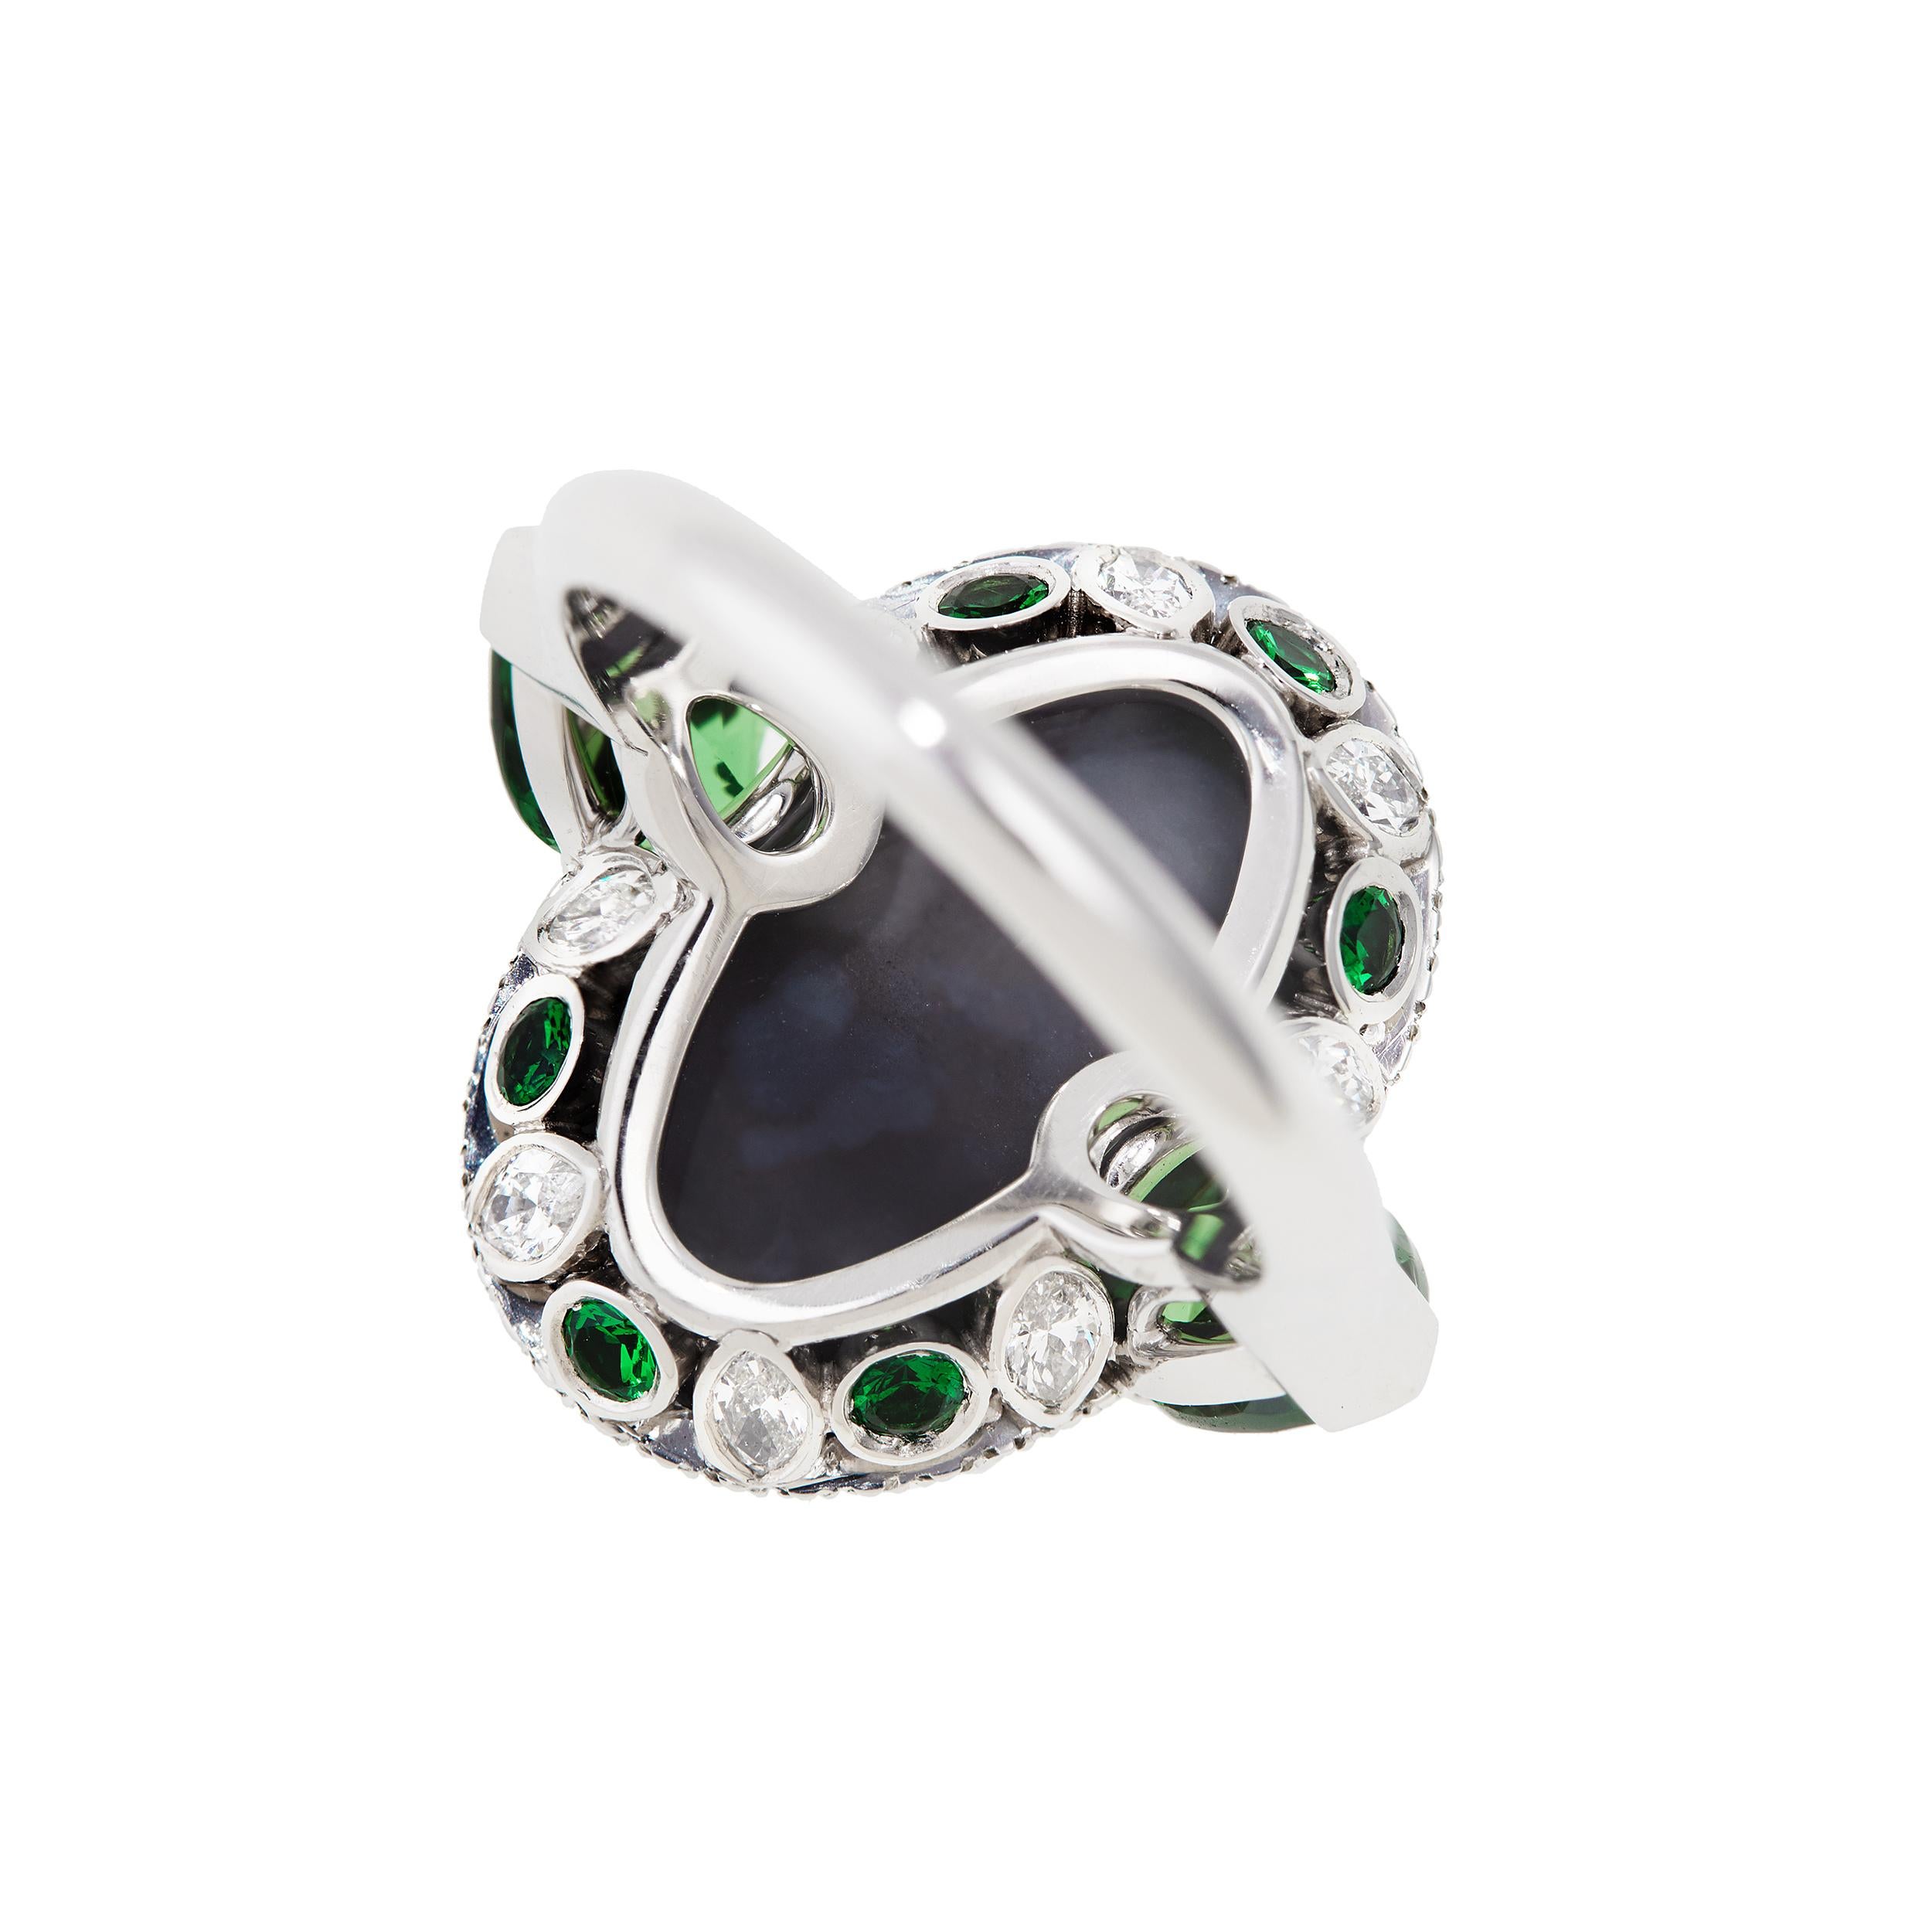 Cabochon AGL 10.99 Carat Black Opal Ring with 4.36 Cts Tsavorite and Diamond in Platinum For Sale